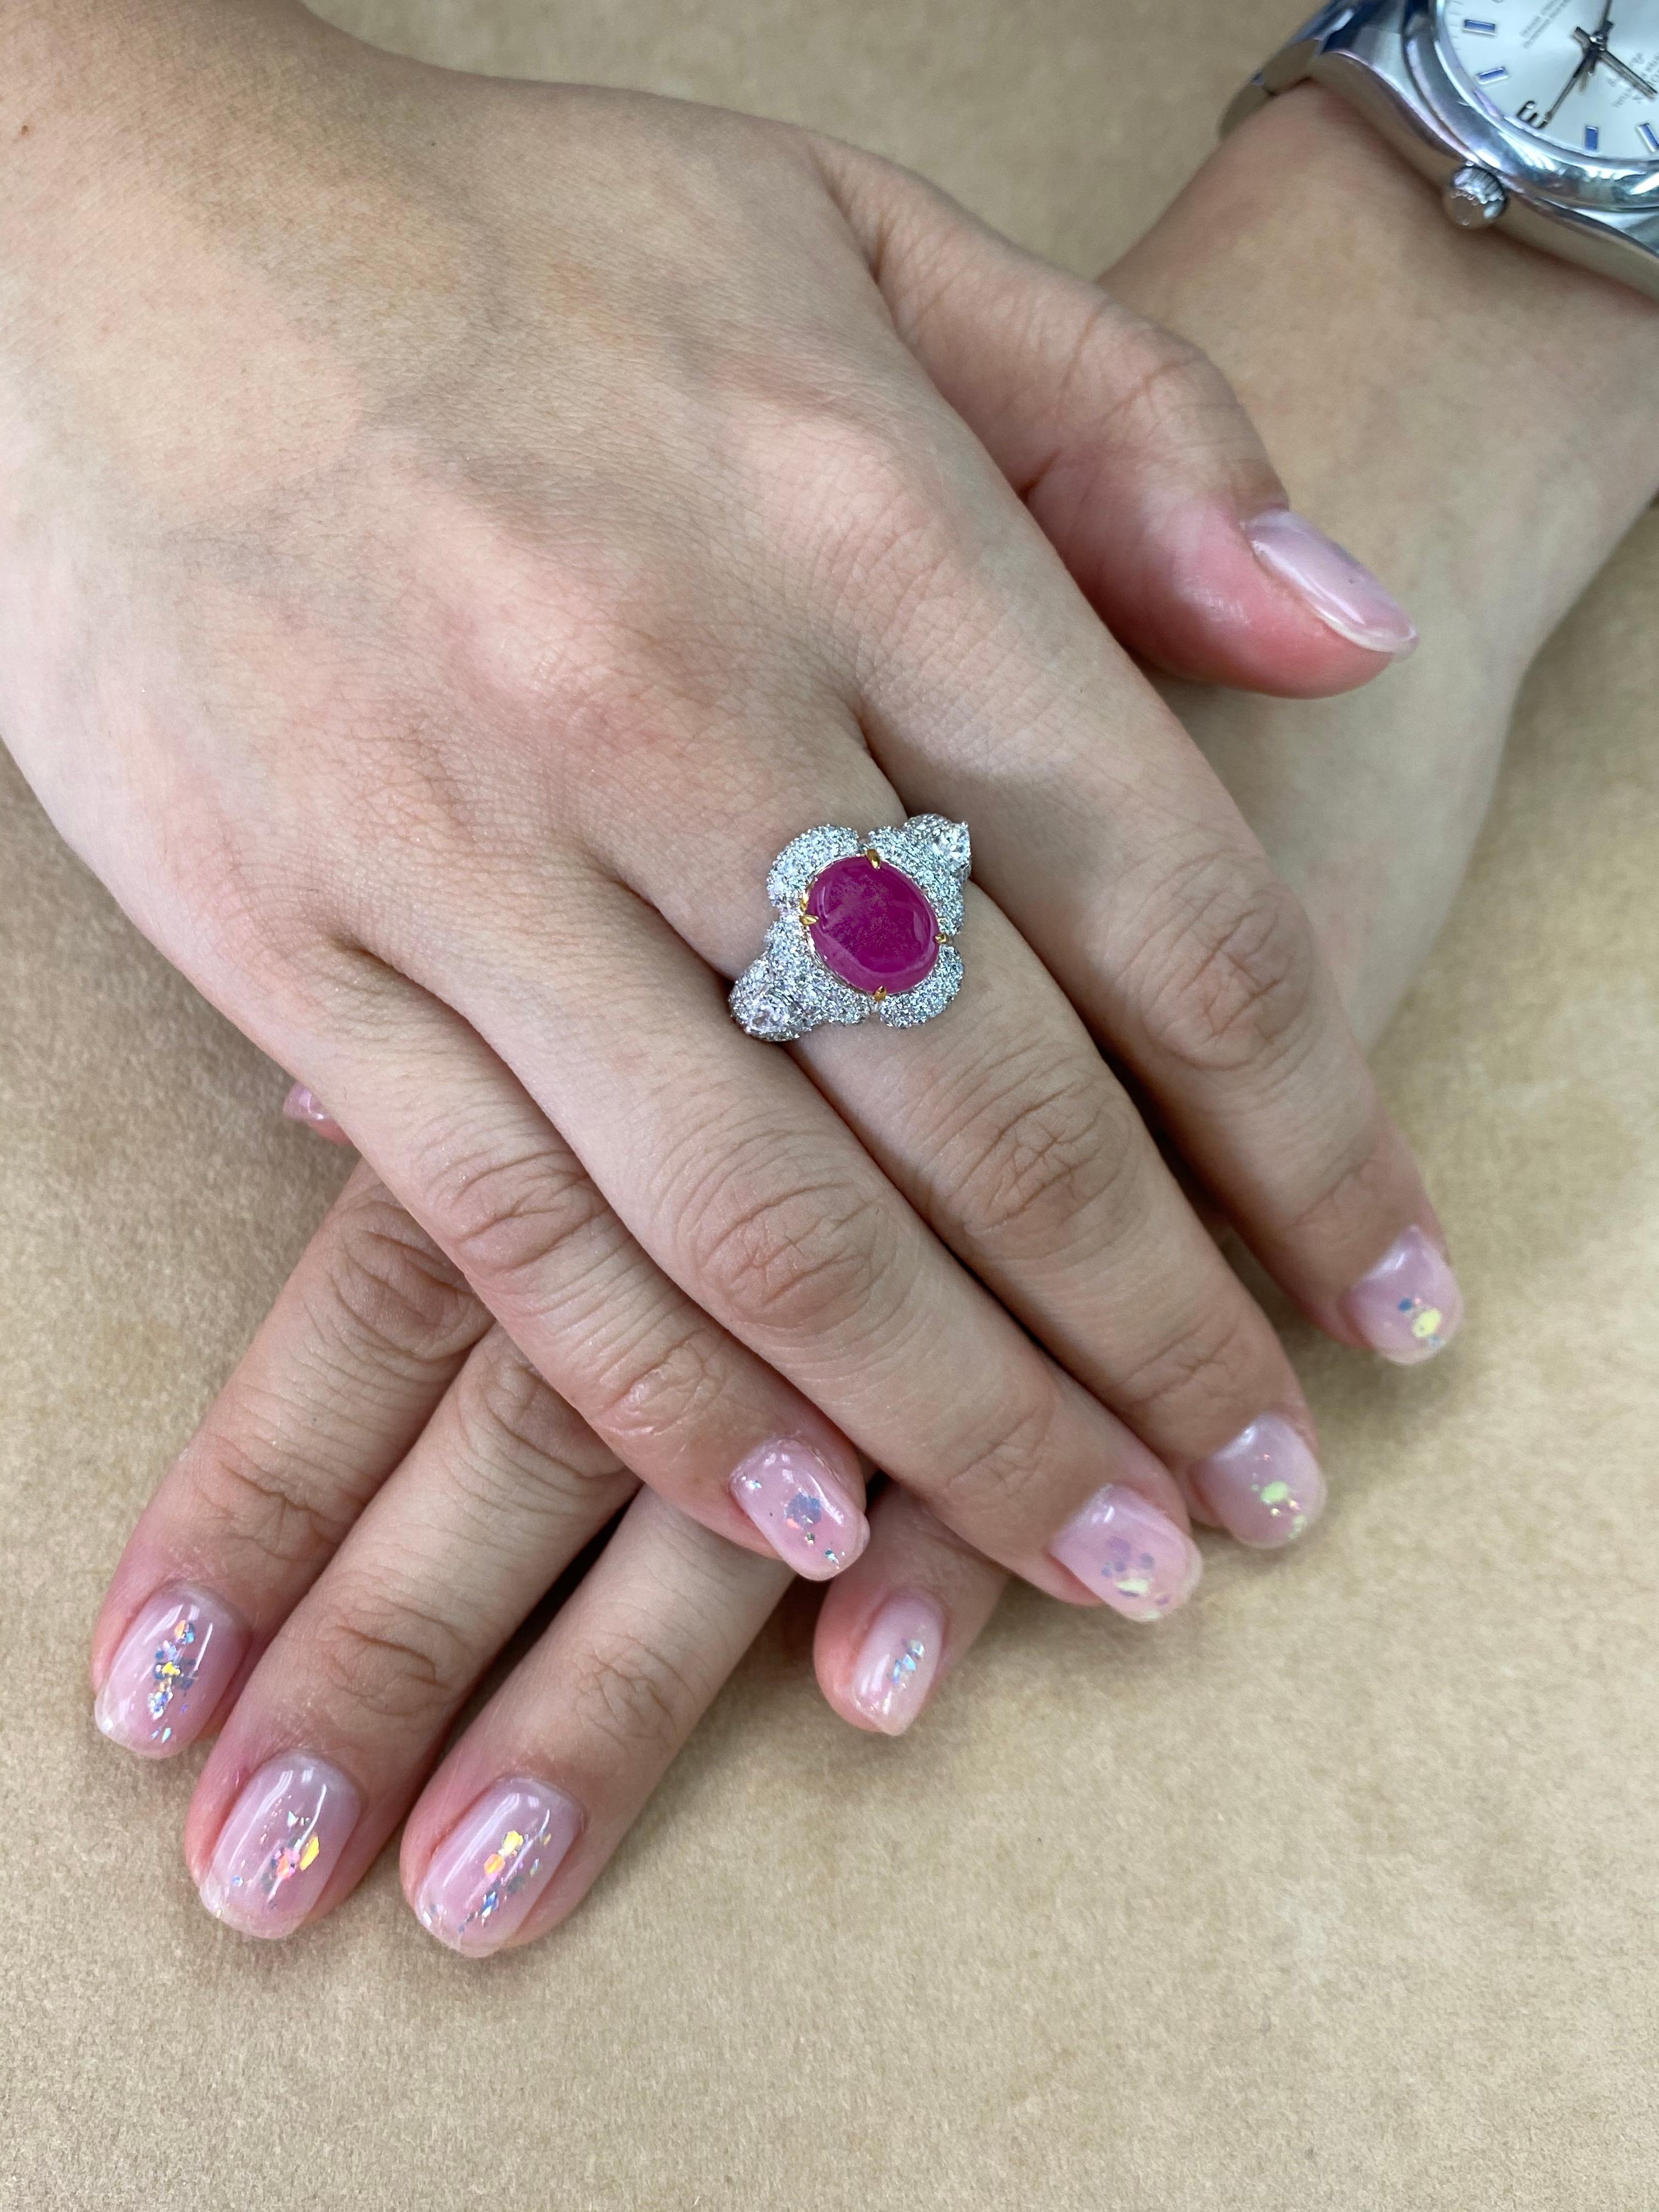 This is a nice piece! Here is a nice larger size pink Ruby and diamond ring. The ring is set in 18k white gold and white diamonds. The center Burma pink ruby cabochon is 3.78cts. There are 2 pear shaped diamonds totaling 0.34cts one on each side of